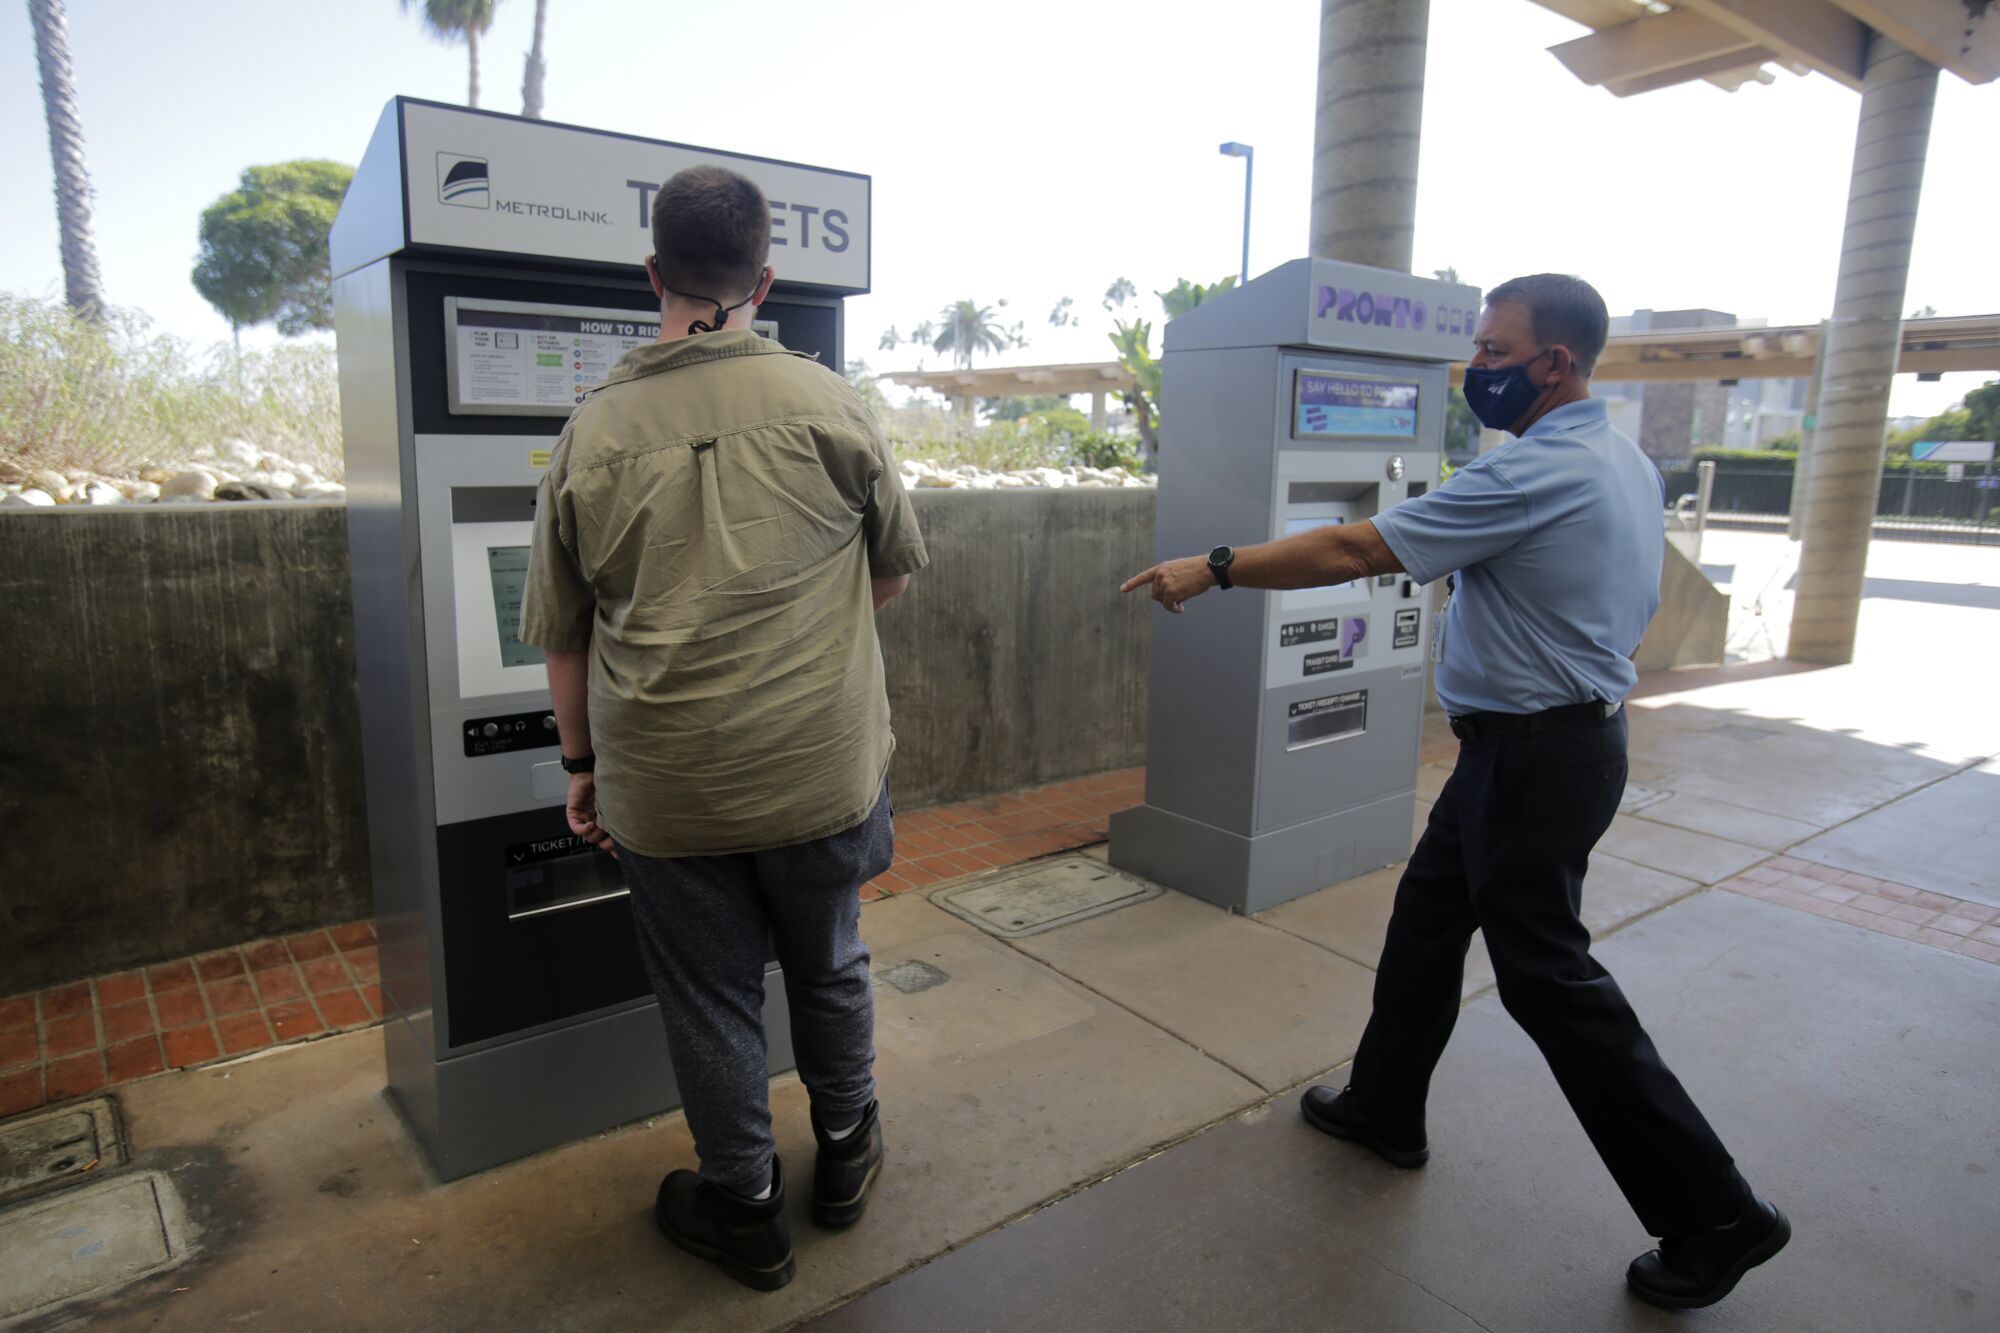 An Amtrak customer service representative, right, tells a passenger to heed the printed notice on a ticket machine.